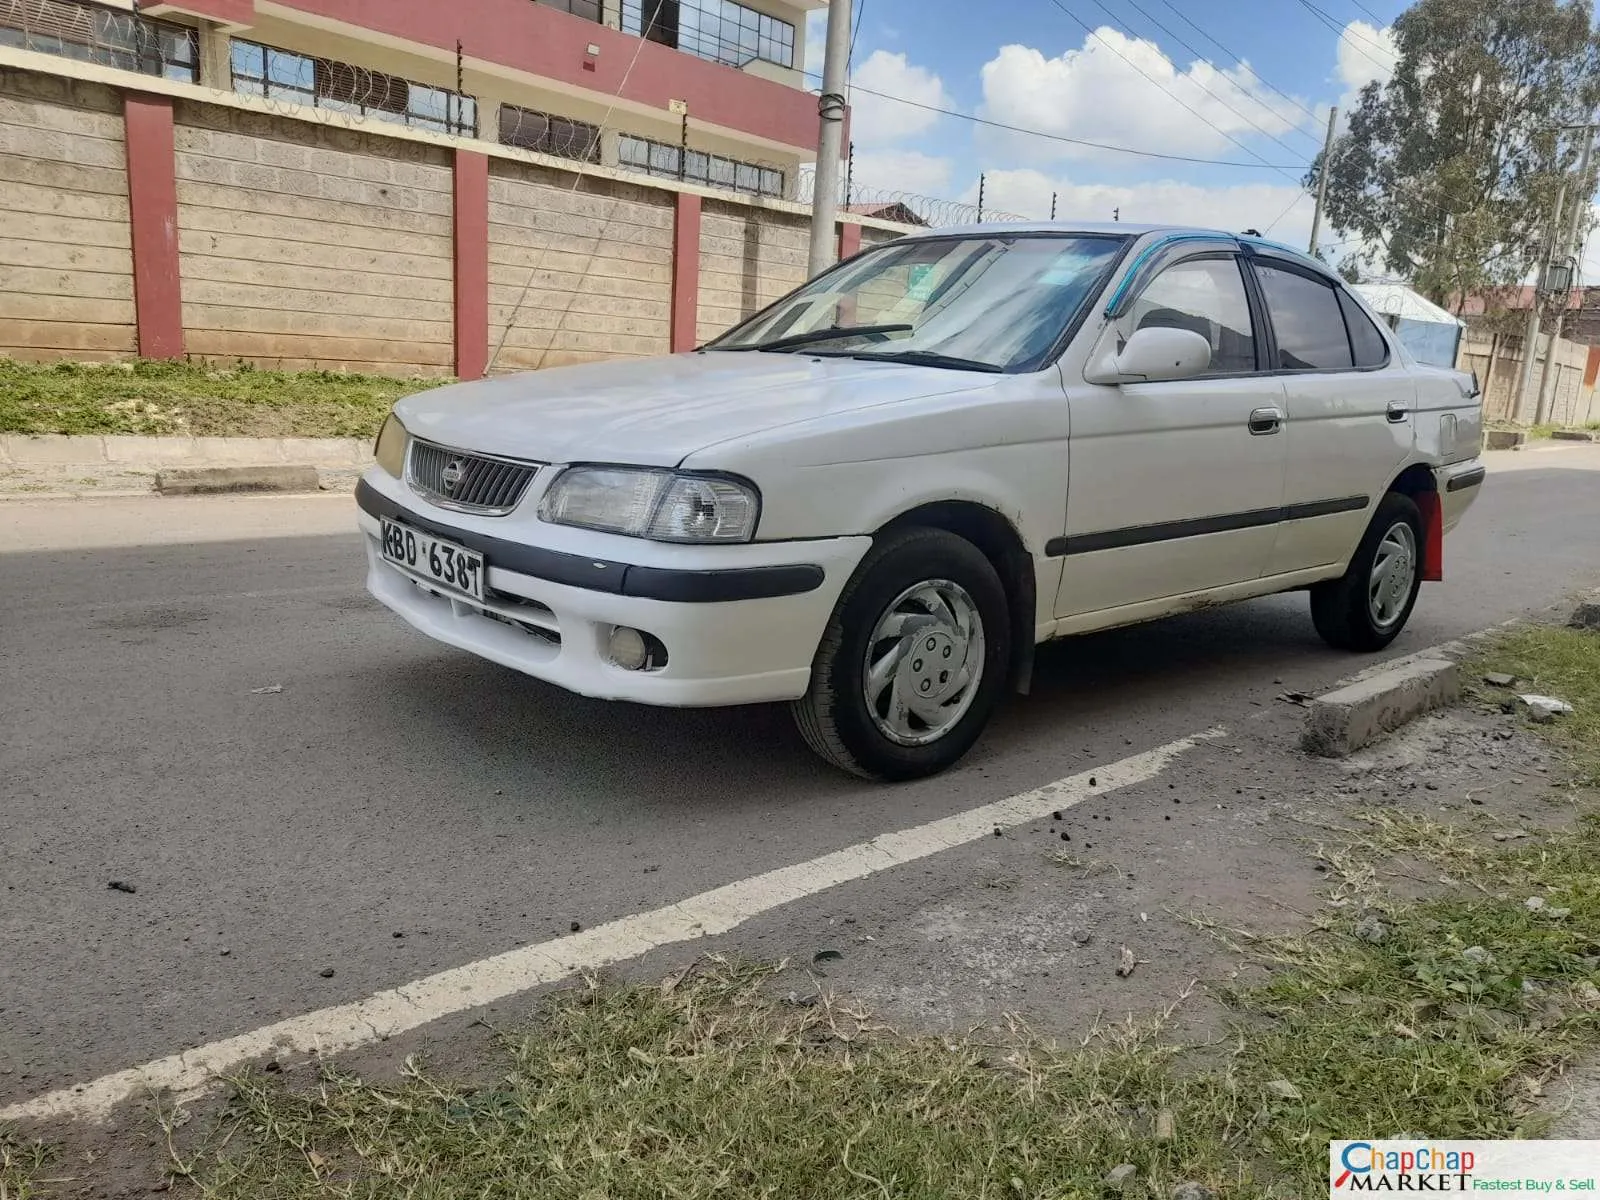 Cars Cars For Sale FOR SALE-Nissan Sunny b15 kenya 150K ONLY You Pay 40% Deposit Trade in Ok Wow! Sunny b14 for sale in kenya hire purchase installments 4